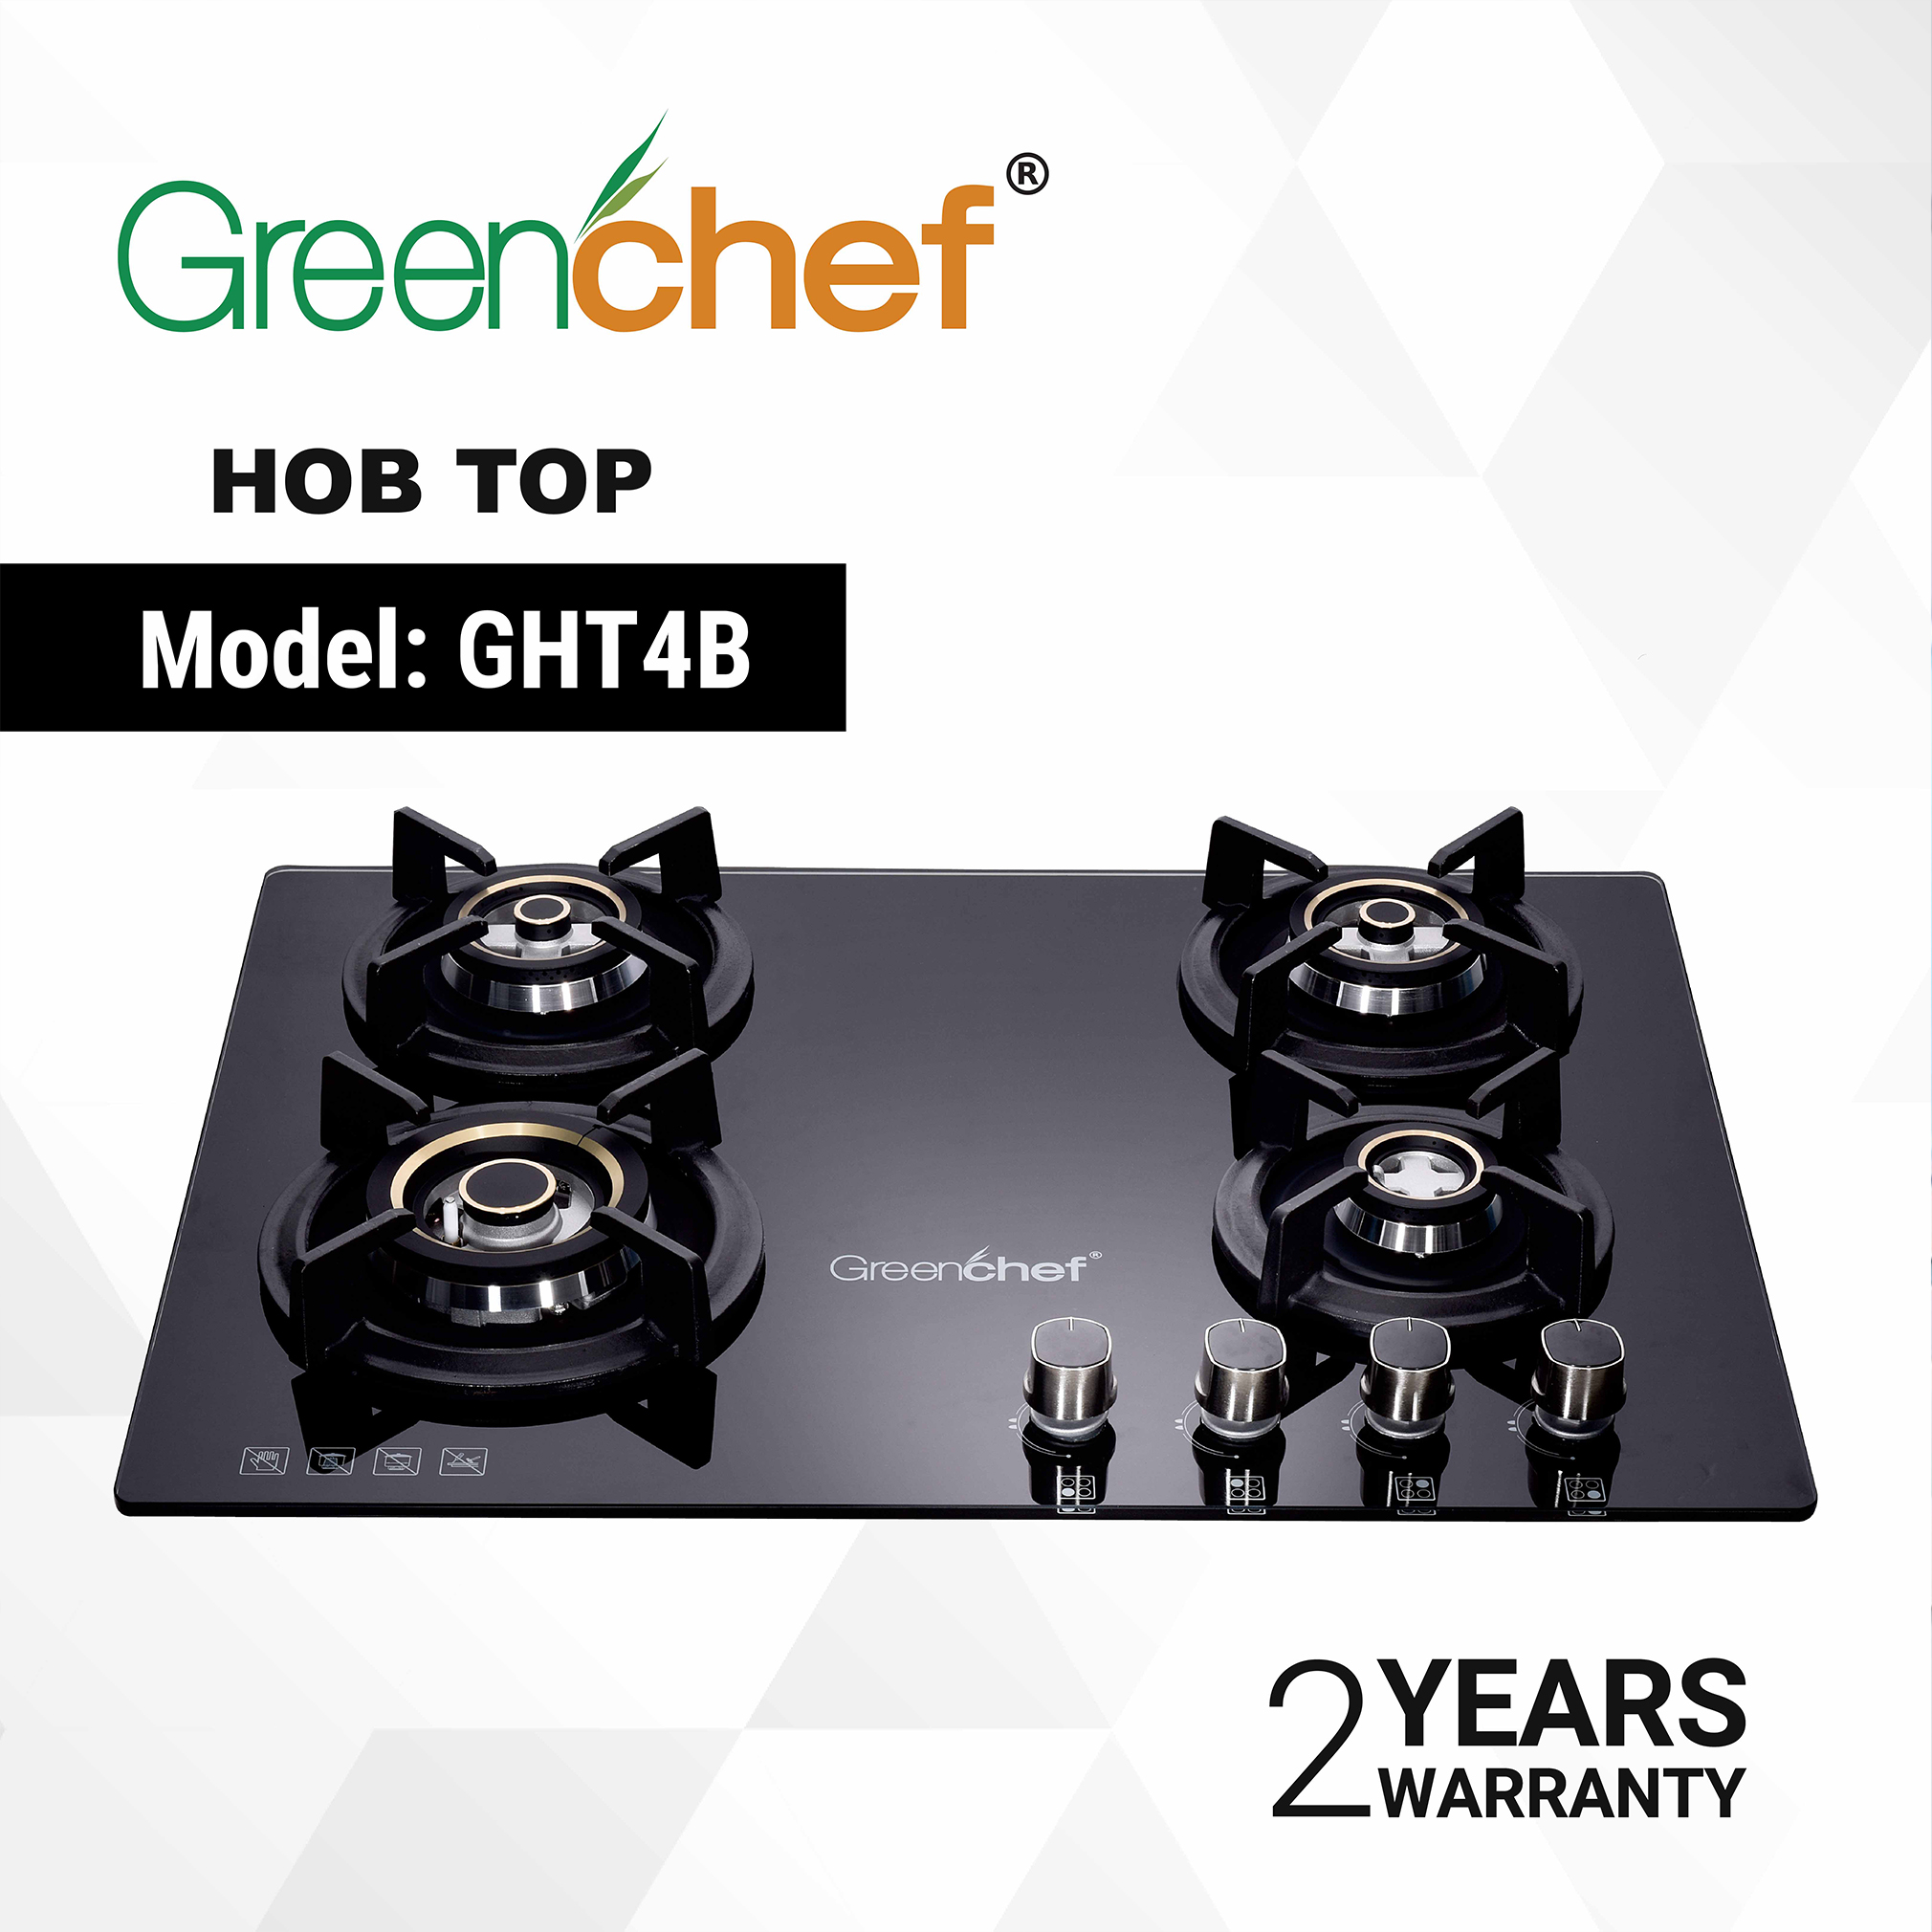 Greenchef Appliances Limited  One-stop solution for home and kitchen